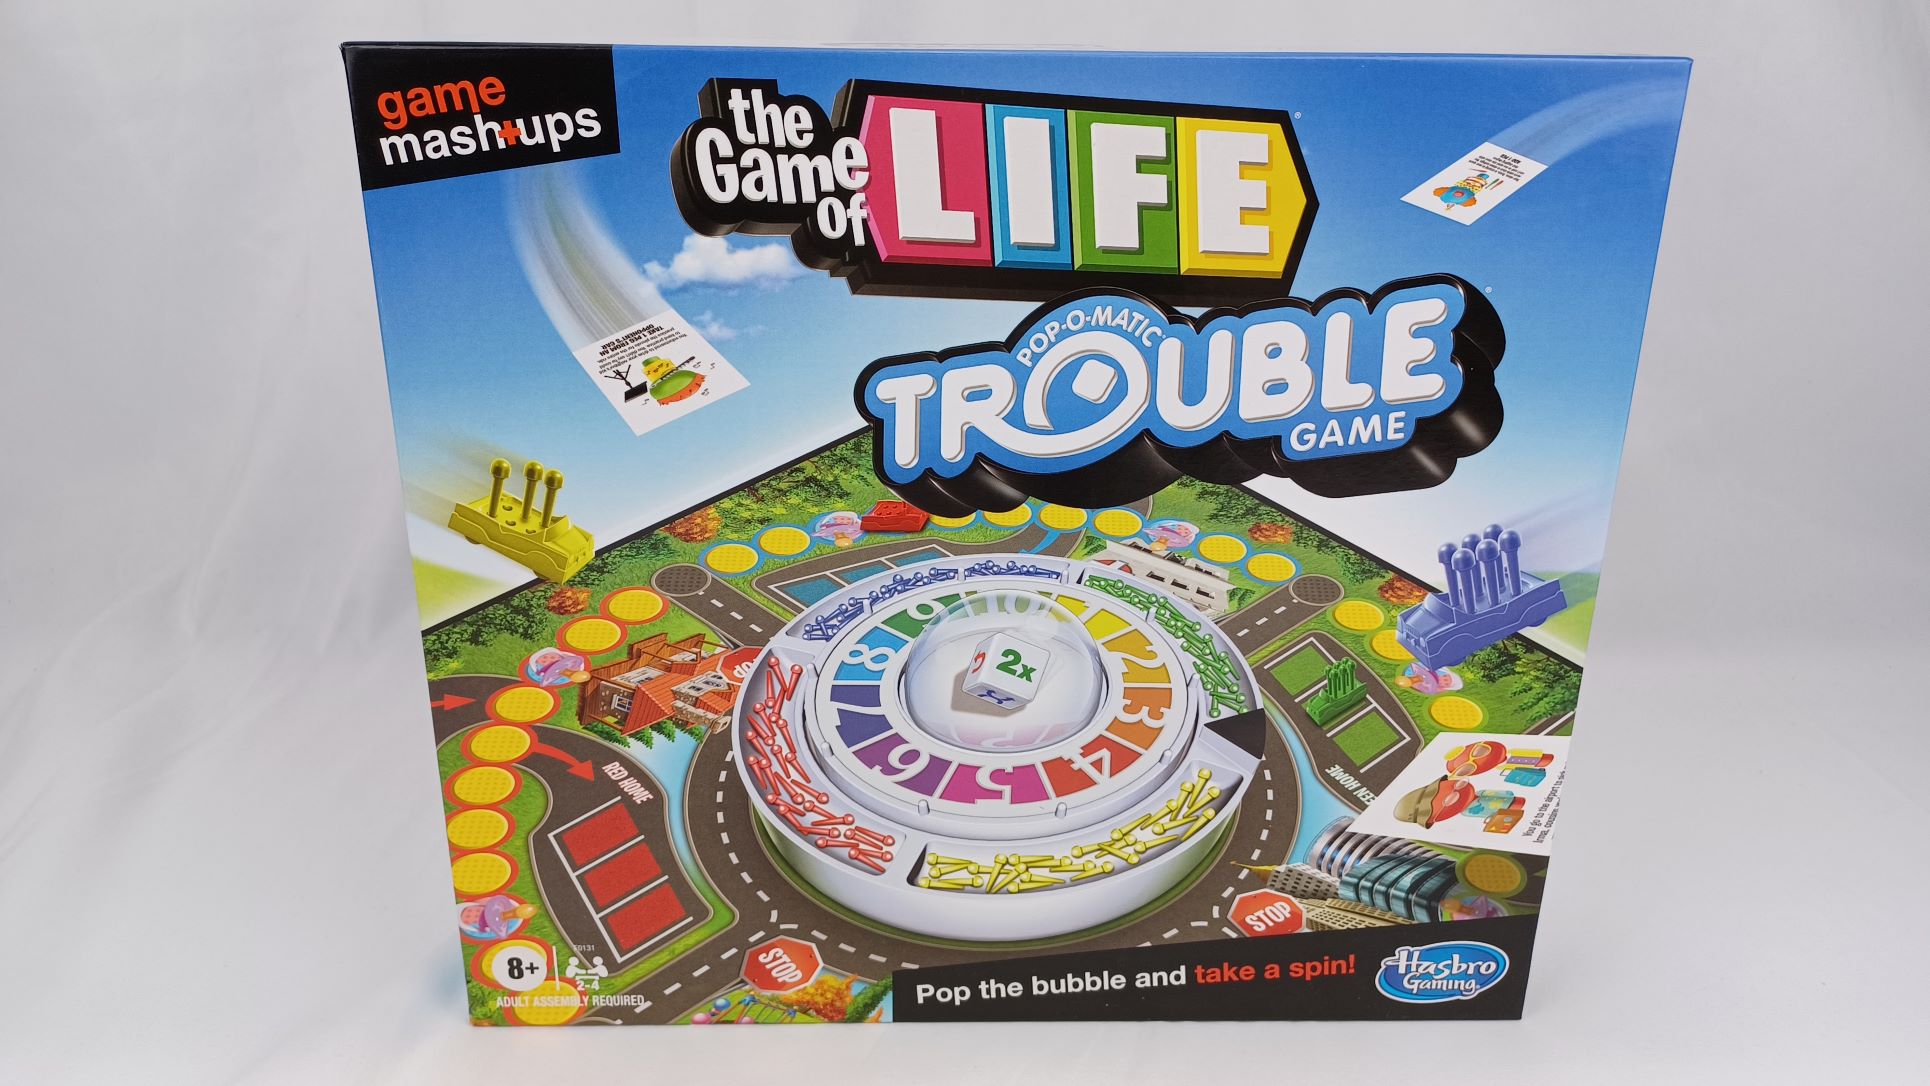 The Game of Life Trouble Box